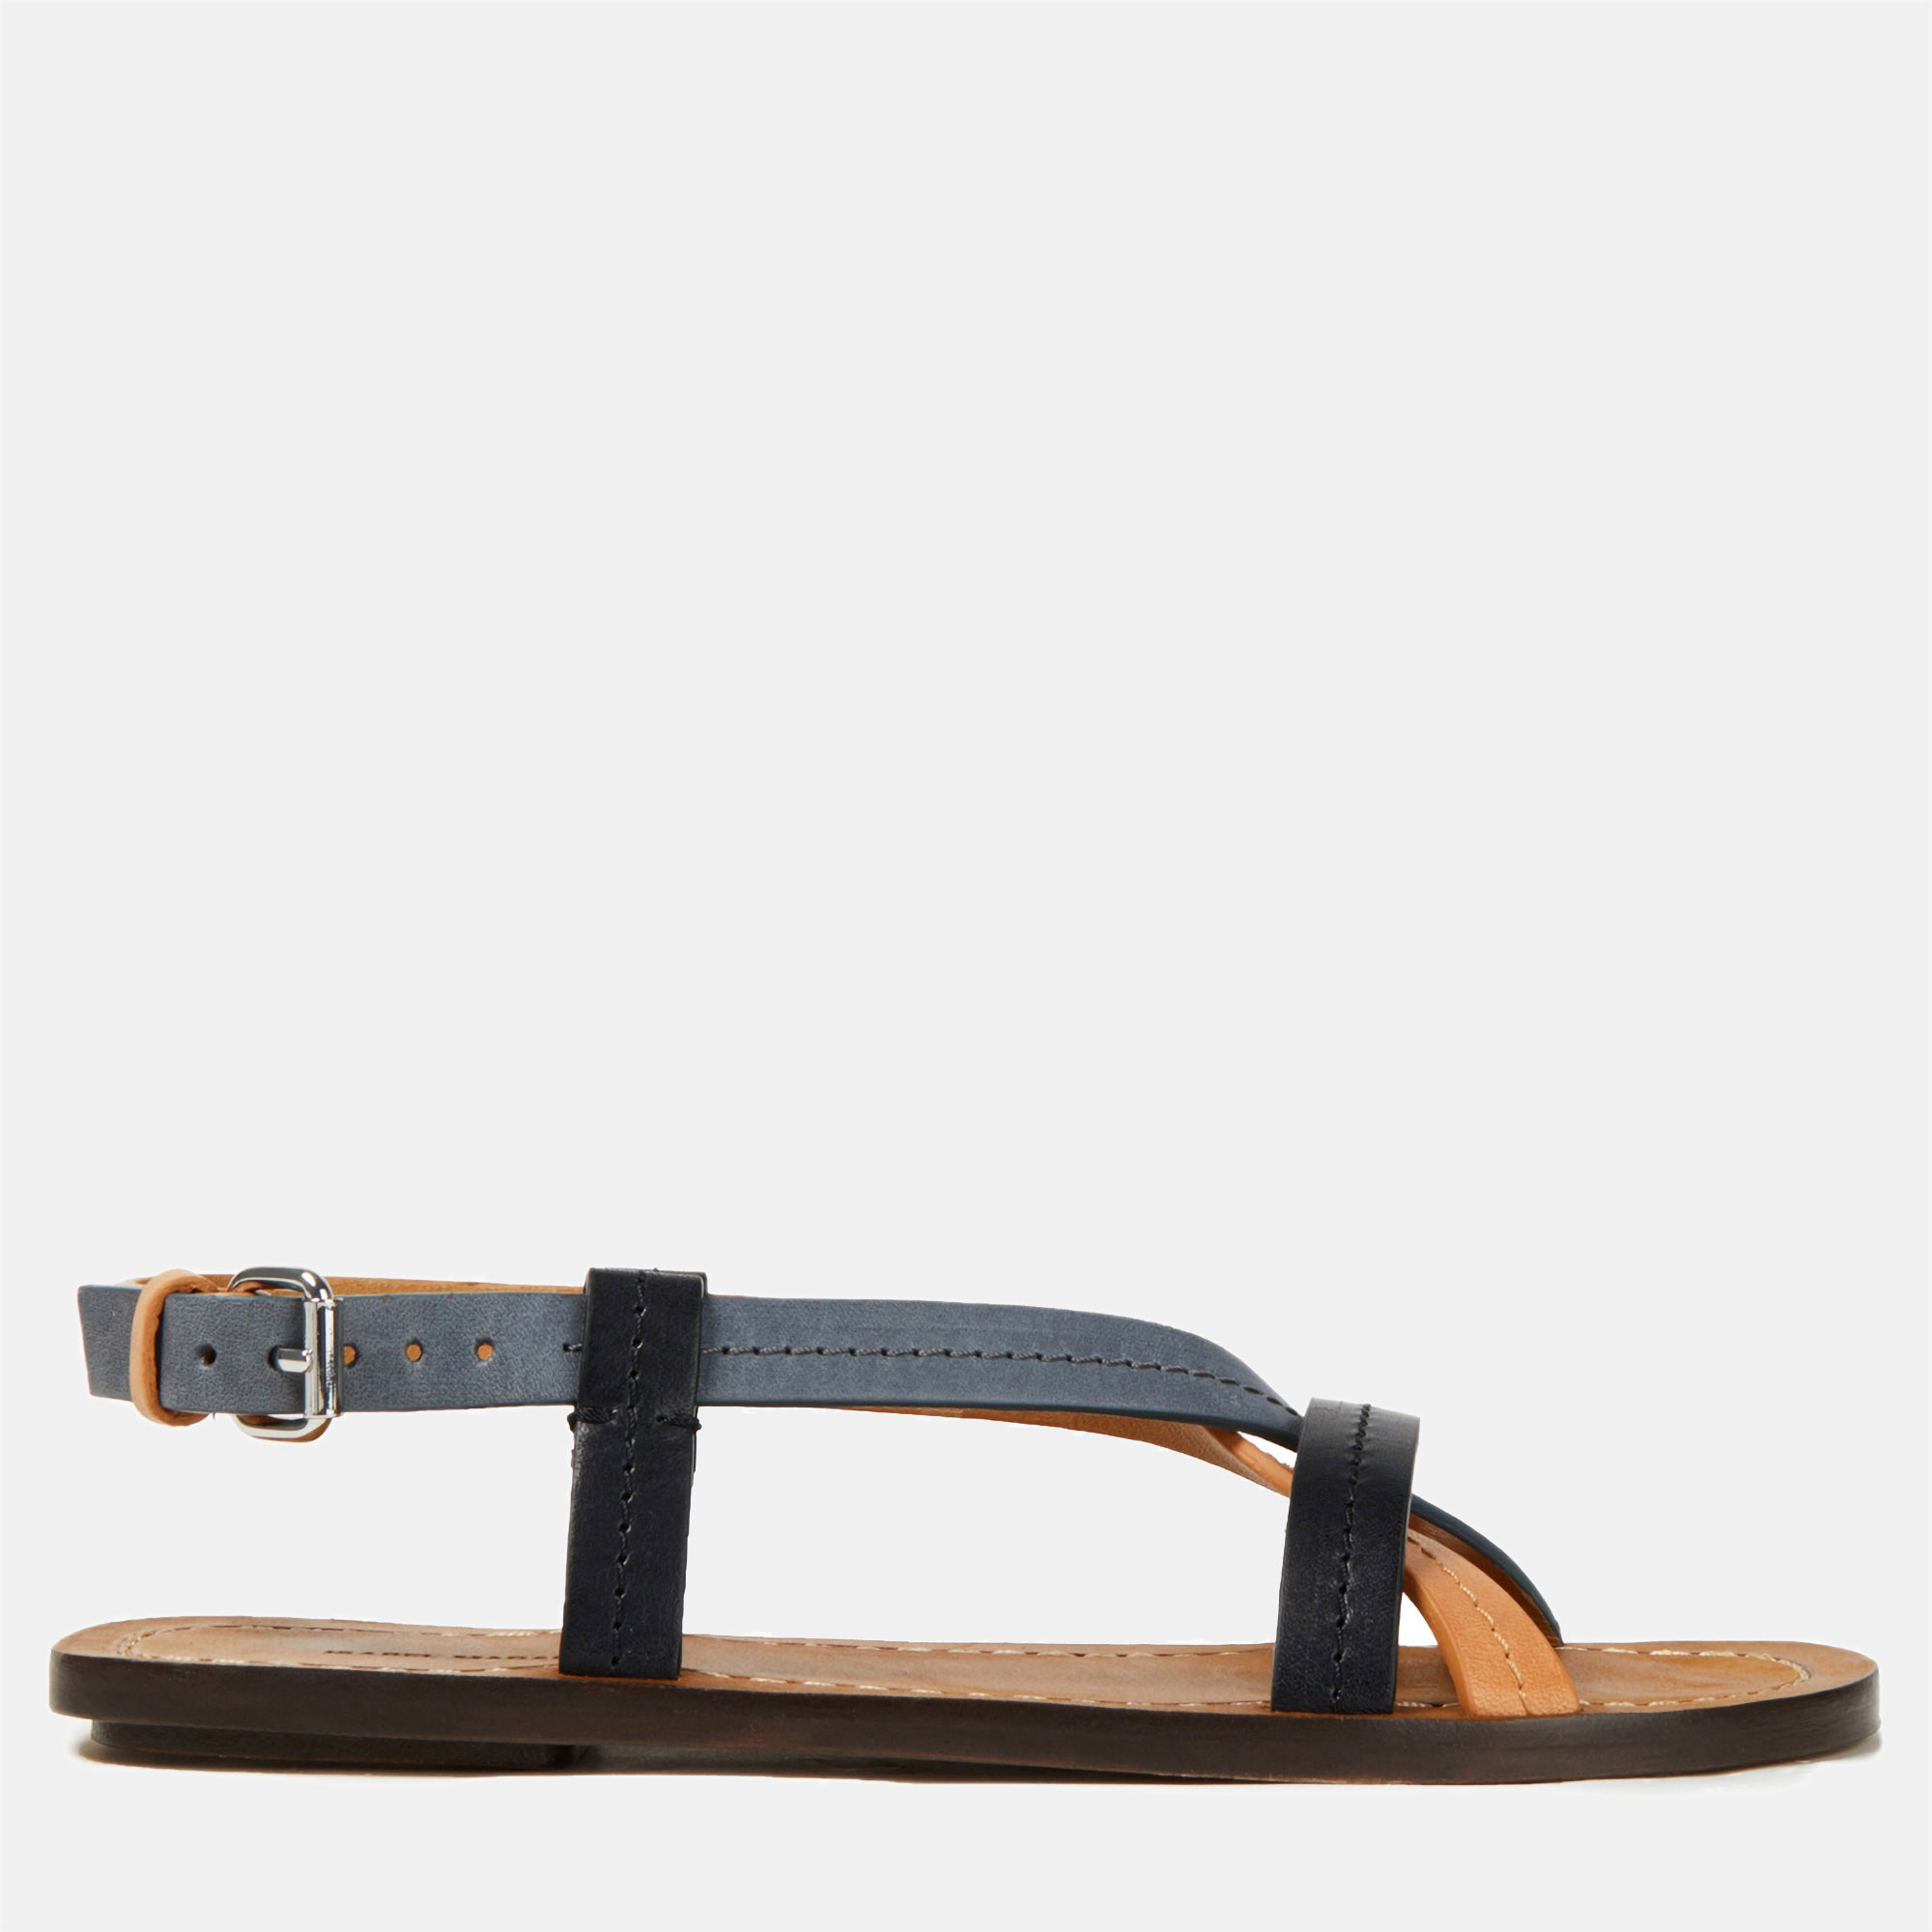 Isabel marant leather strappy flat sandals 36